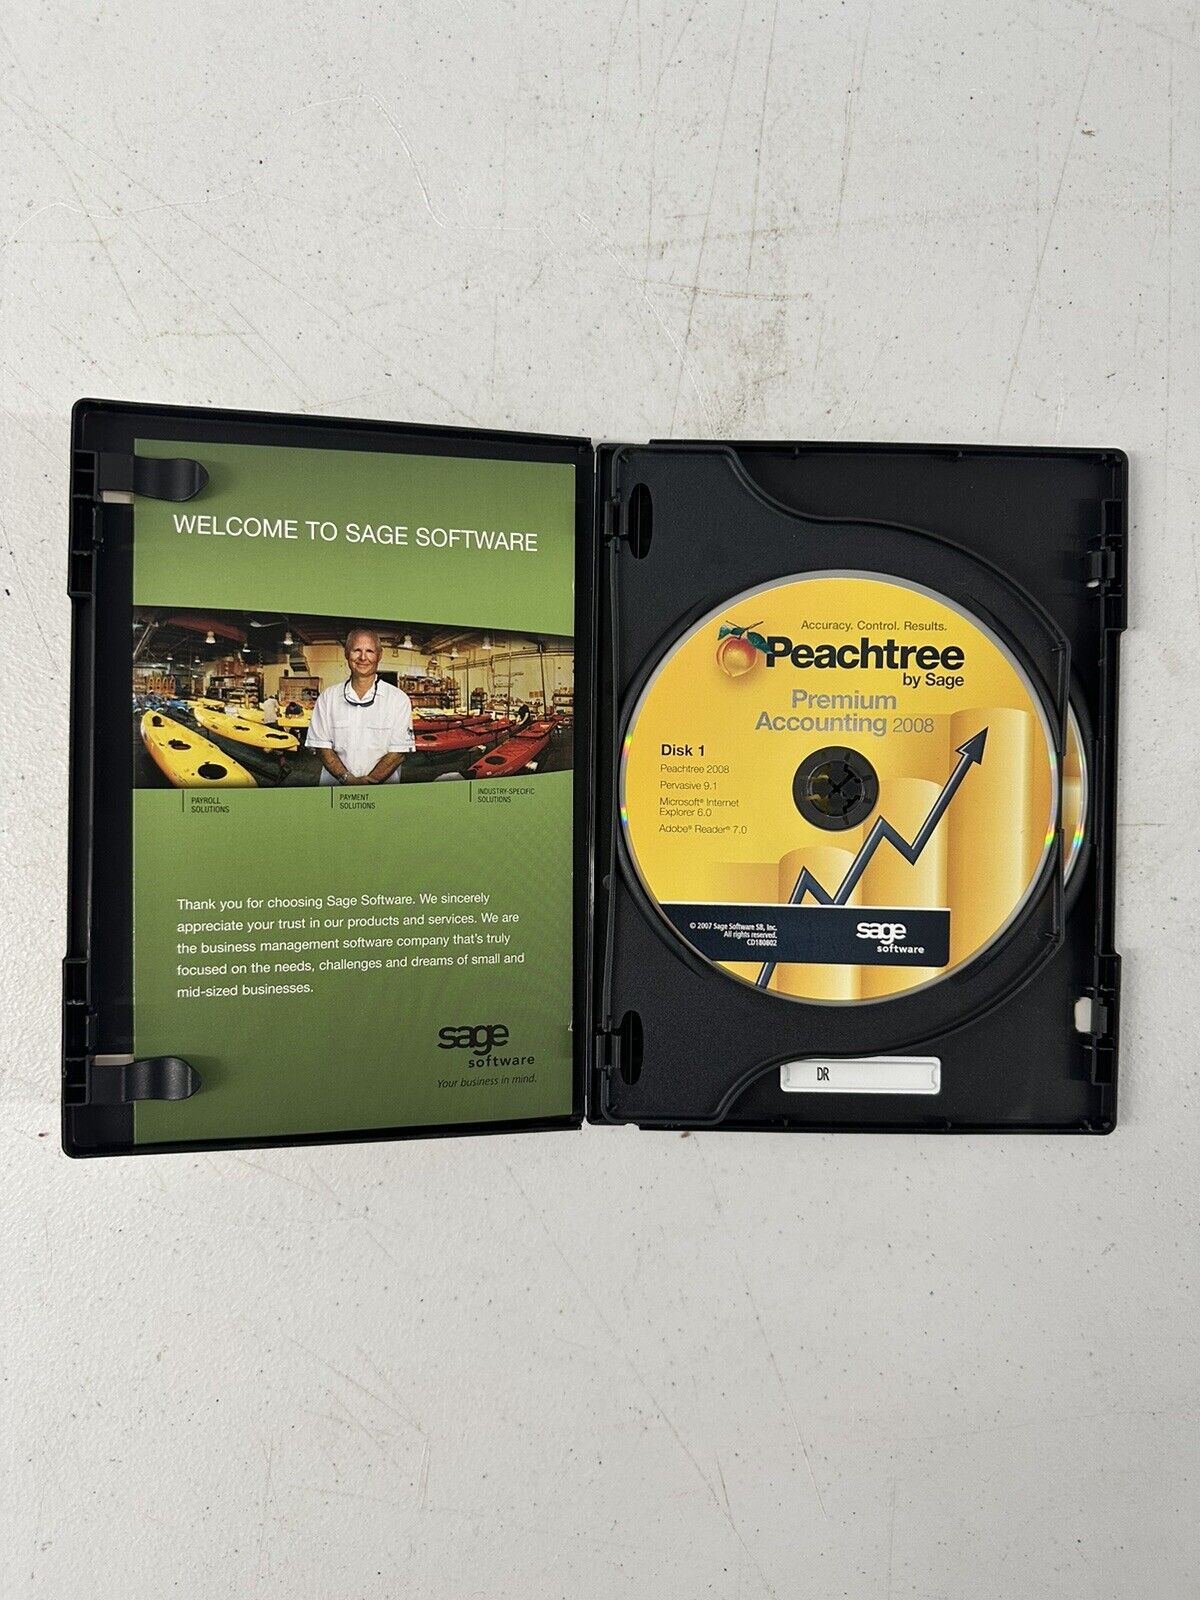 Sage Peachtree Premium Accounting 2008 For Windows PC W/ Serial Number